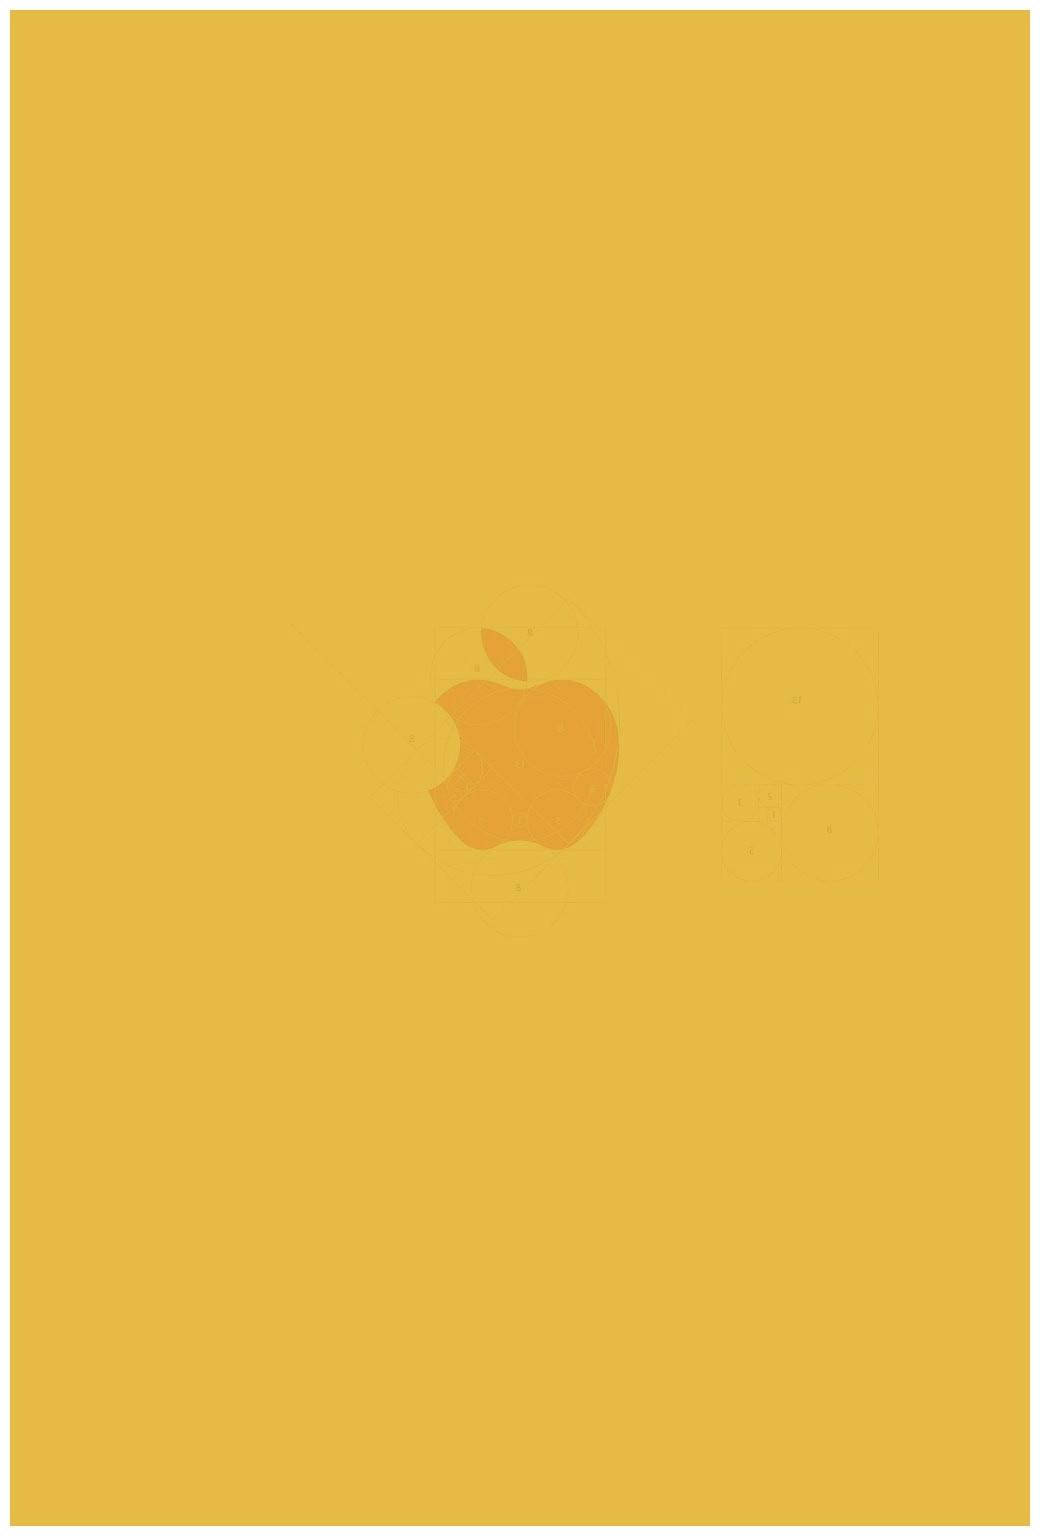 Apple Logo Printed On Cute Pastel Yellow Aesthetic Background